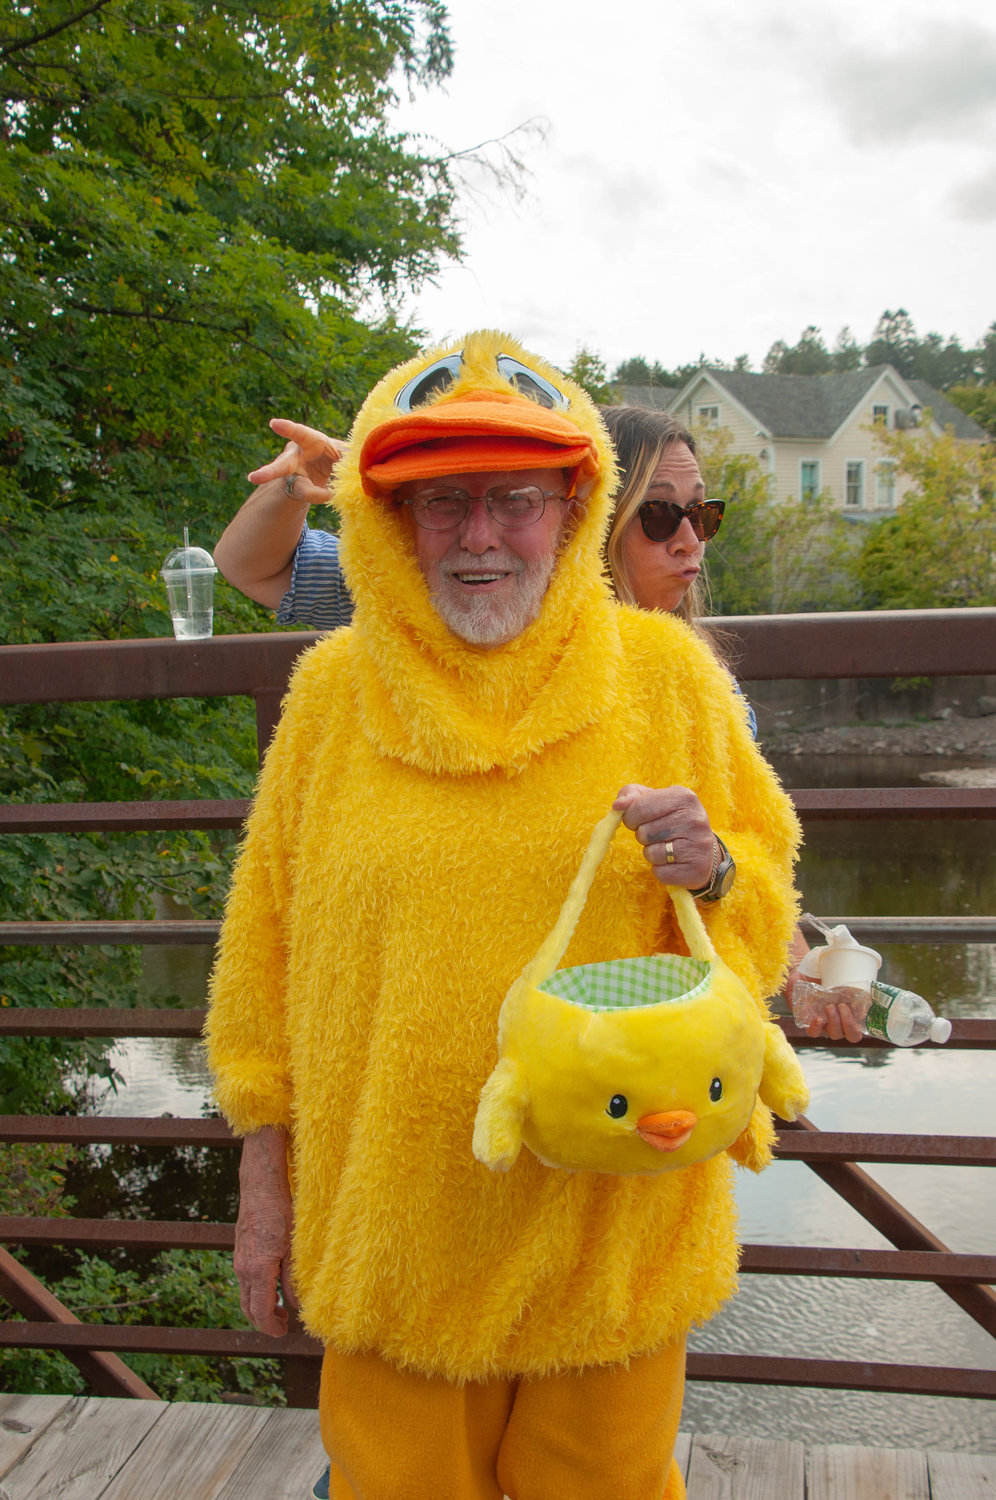 Jeffersonville's much-beloved Jack Costello was decked out in proper attire for the duck race at Jeff Jamboree last weekend.